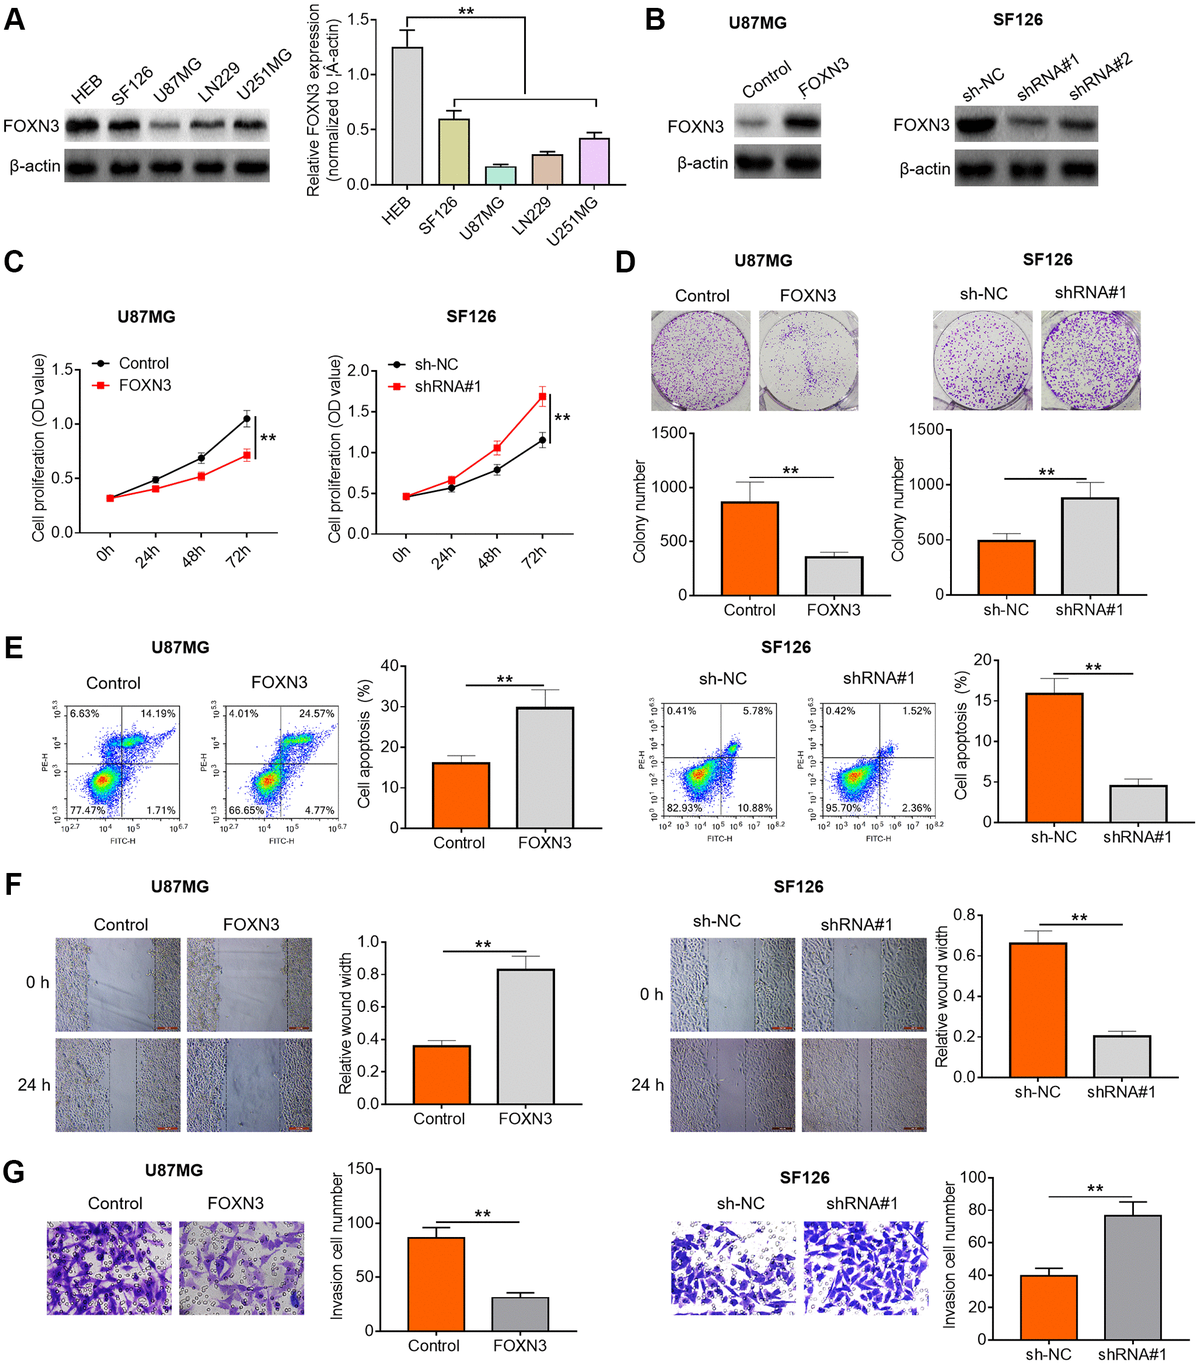 FOXN3 suppresses glioma cell proliferation, survival and invasion. (A) FOXN3 protein expression levels in normal human L02 liver cells and glioma cell lines (SF126, SK-Hep-1, Huh6 and Huh7) were determined by Western blotting. (B) Transfection efficiency was detected via Western blotting after transfection with FOXN3 expression vectors in U87MG cells or transfection with specific shRNAs in SF126 cells. (C) Cell proliferation was measured by MTT assays after transfection with FOXN3 expression vectors in U87MG cells or transfection with shRNA#1 in SF126 cells. (D) Colony formation ability was analyzed using colony formation assays after transfection with FOXN3 expression vectors in U87MG cells or transfection with shRNA#1 in SF126 cells. (E) Apoptosis was assessed via flow cytometry after transfection with FOXN3 expression vectors in U87MG cells or transfection with shRNA#1 in SF126 cells. (F) Migration capability was evaluated by scratch wound healing assays after transfection with FOXN3 expression vectors in U87MG cells or transfection with shRNA#1 in SF126 cells. (G) Invasion ability was determined via Transwell invasion assays after transfection with FOXN3 expression vectors in U87MG cells or transfection with shRNA#1 in SF126 cells. **P 